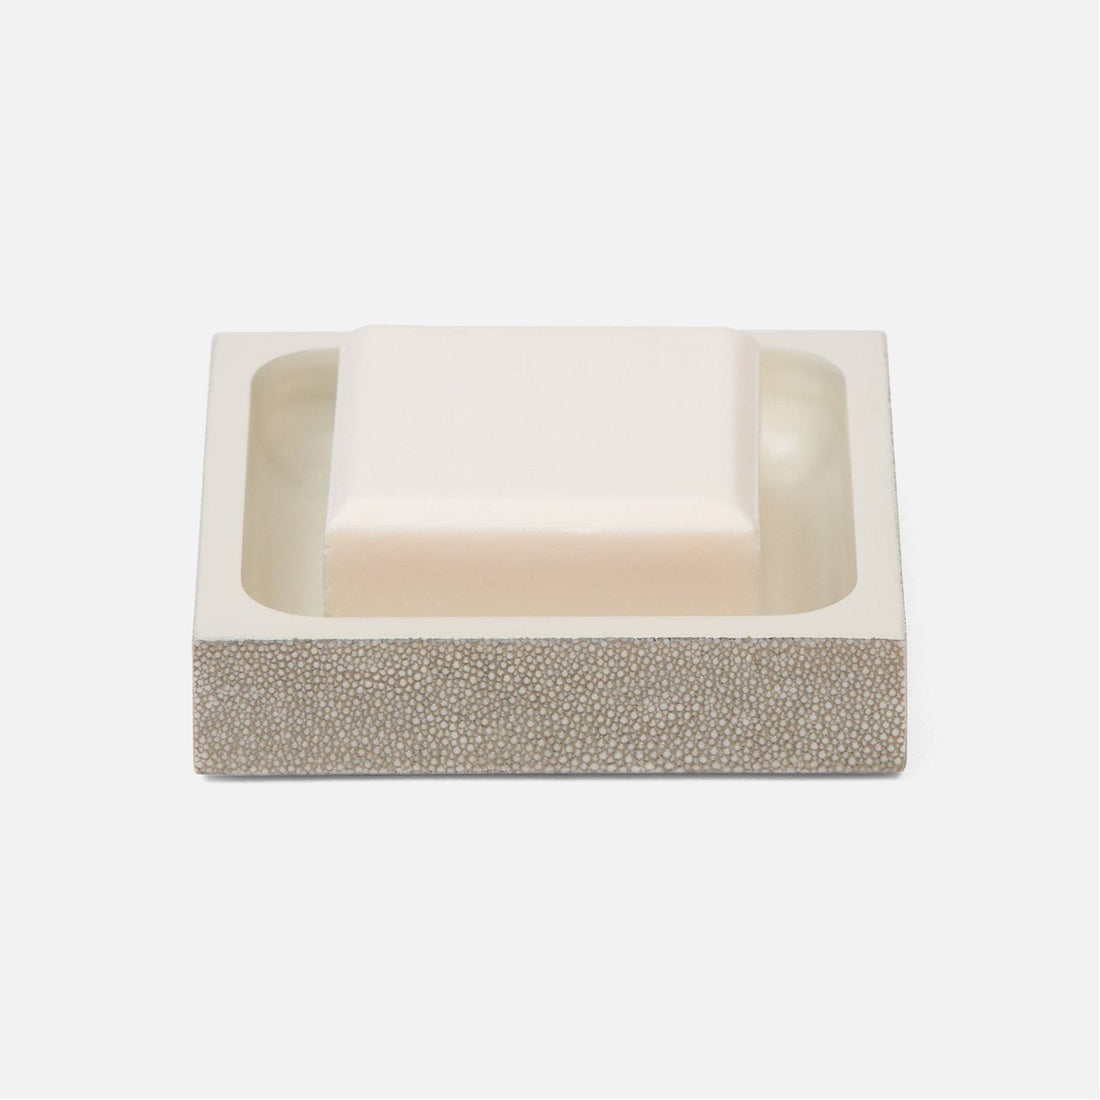 Pigeon and Poodle Manchester Soap Dish Square, Straight